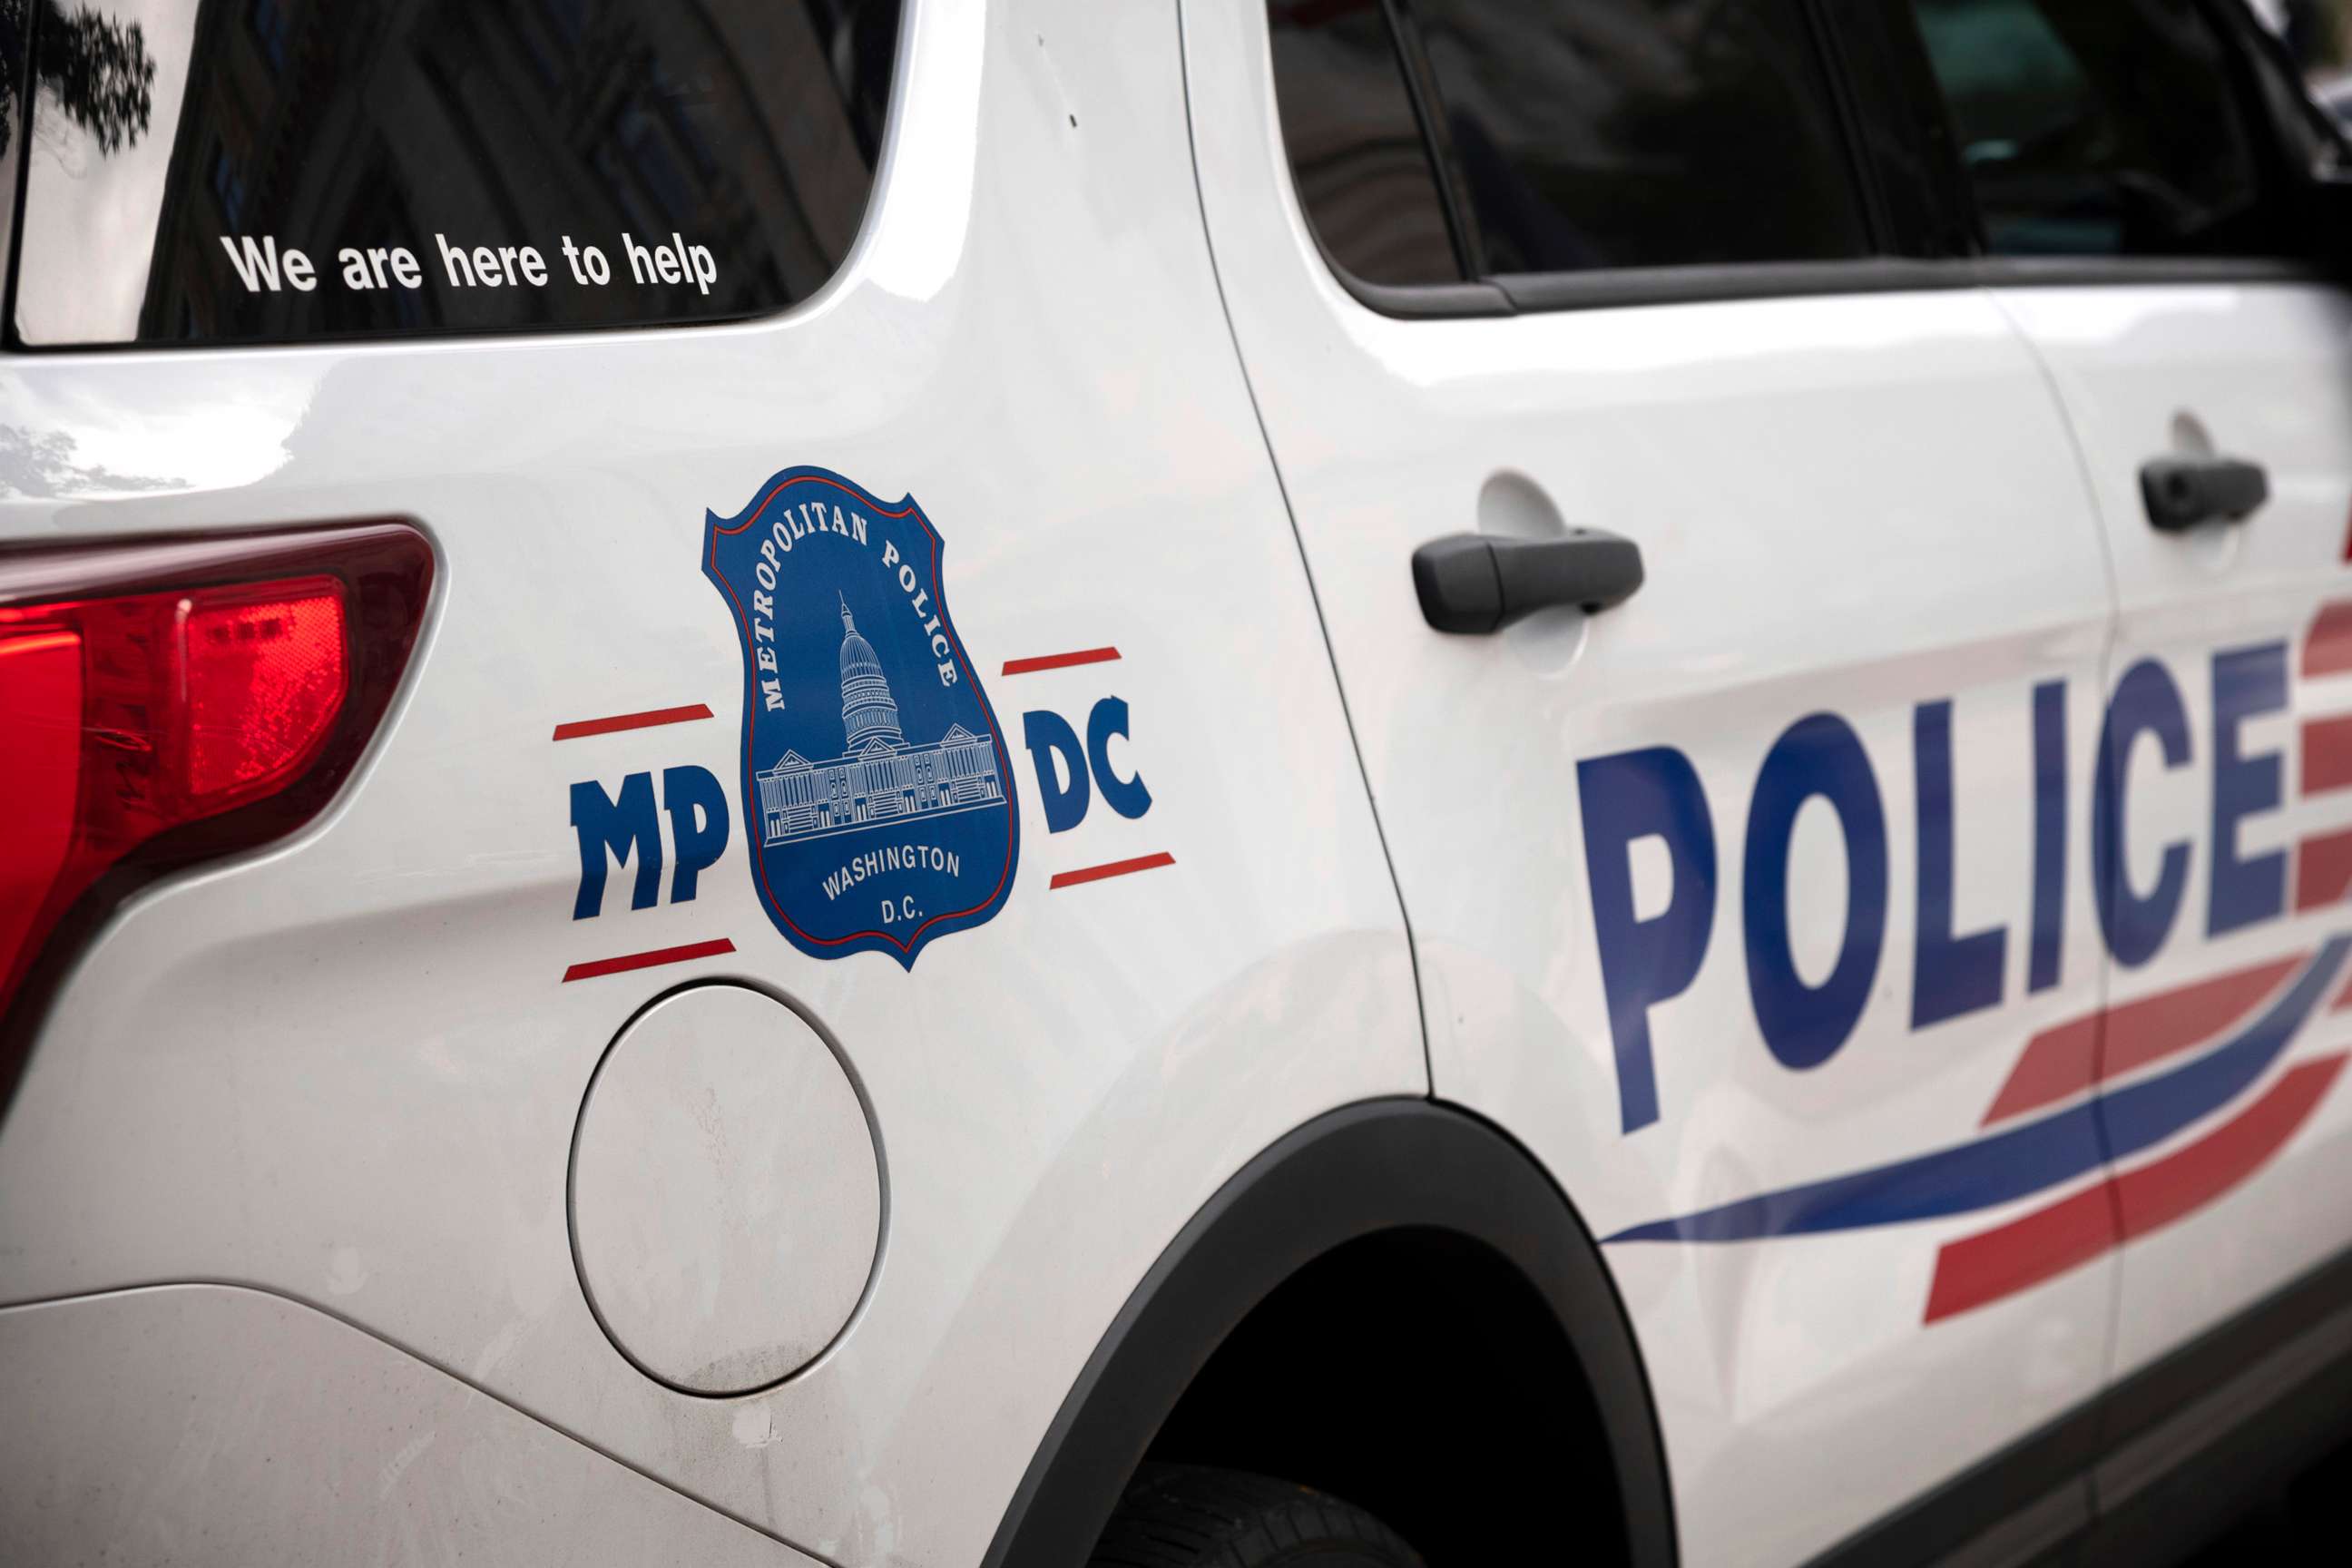 PHOTO: A general view of a Washington Metropolitan Police Department logo, as seen on a vehicle sitting idle on a street in downtown Washington, D.C., Oct. 13, 2021.